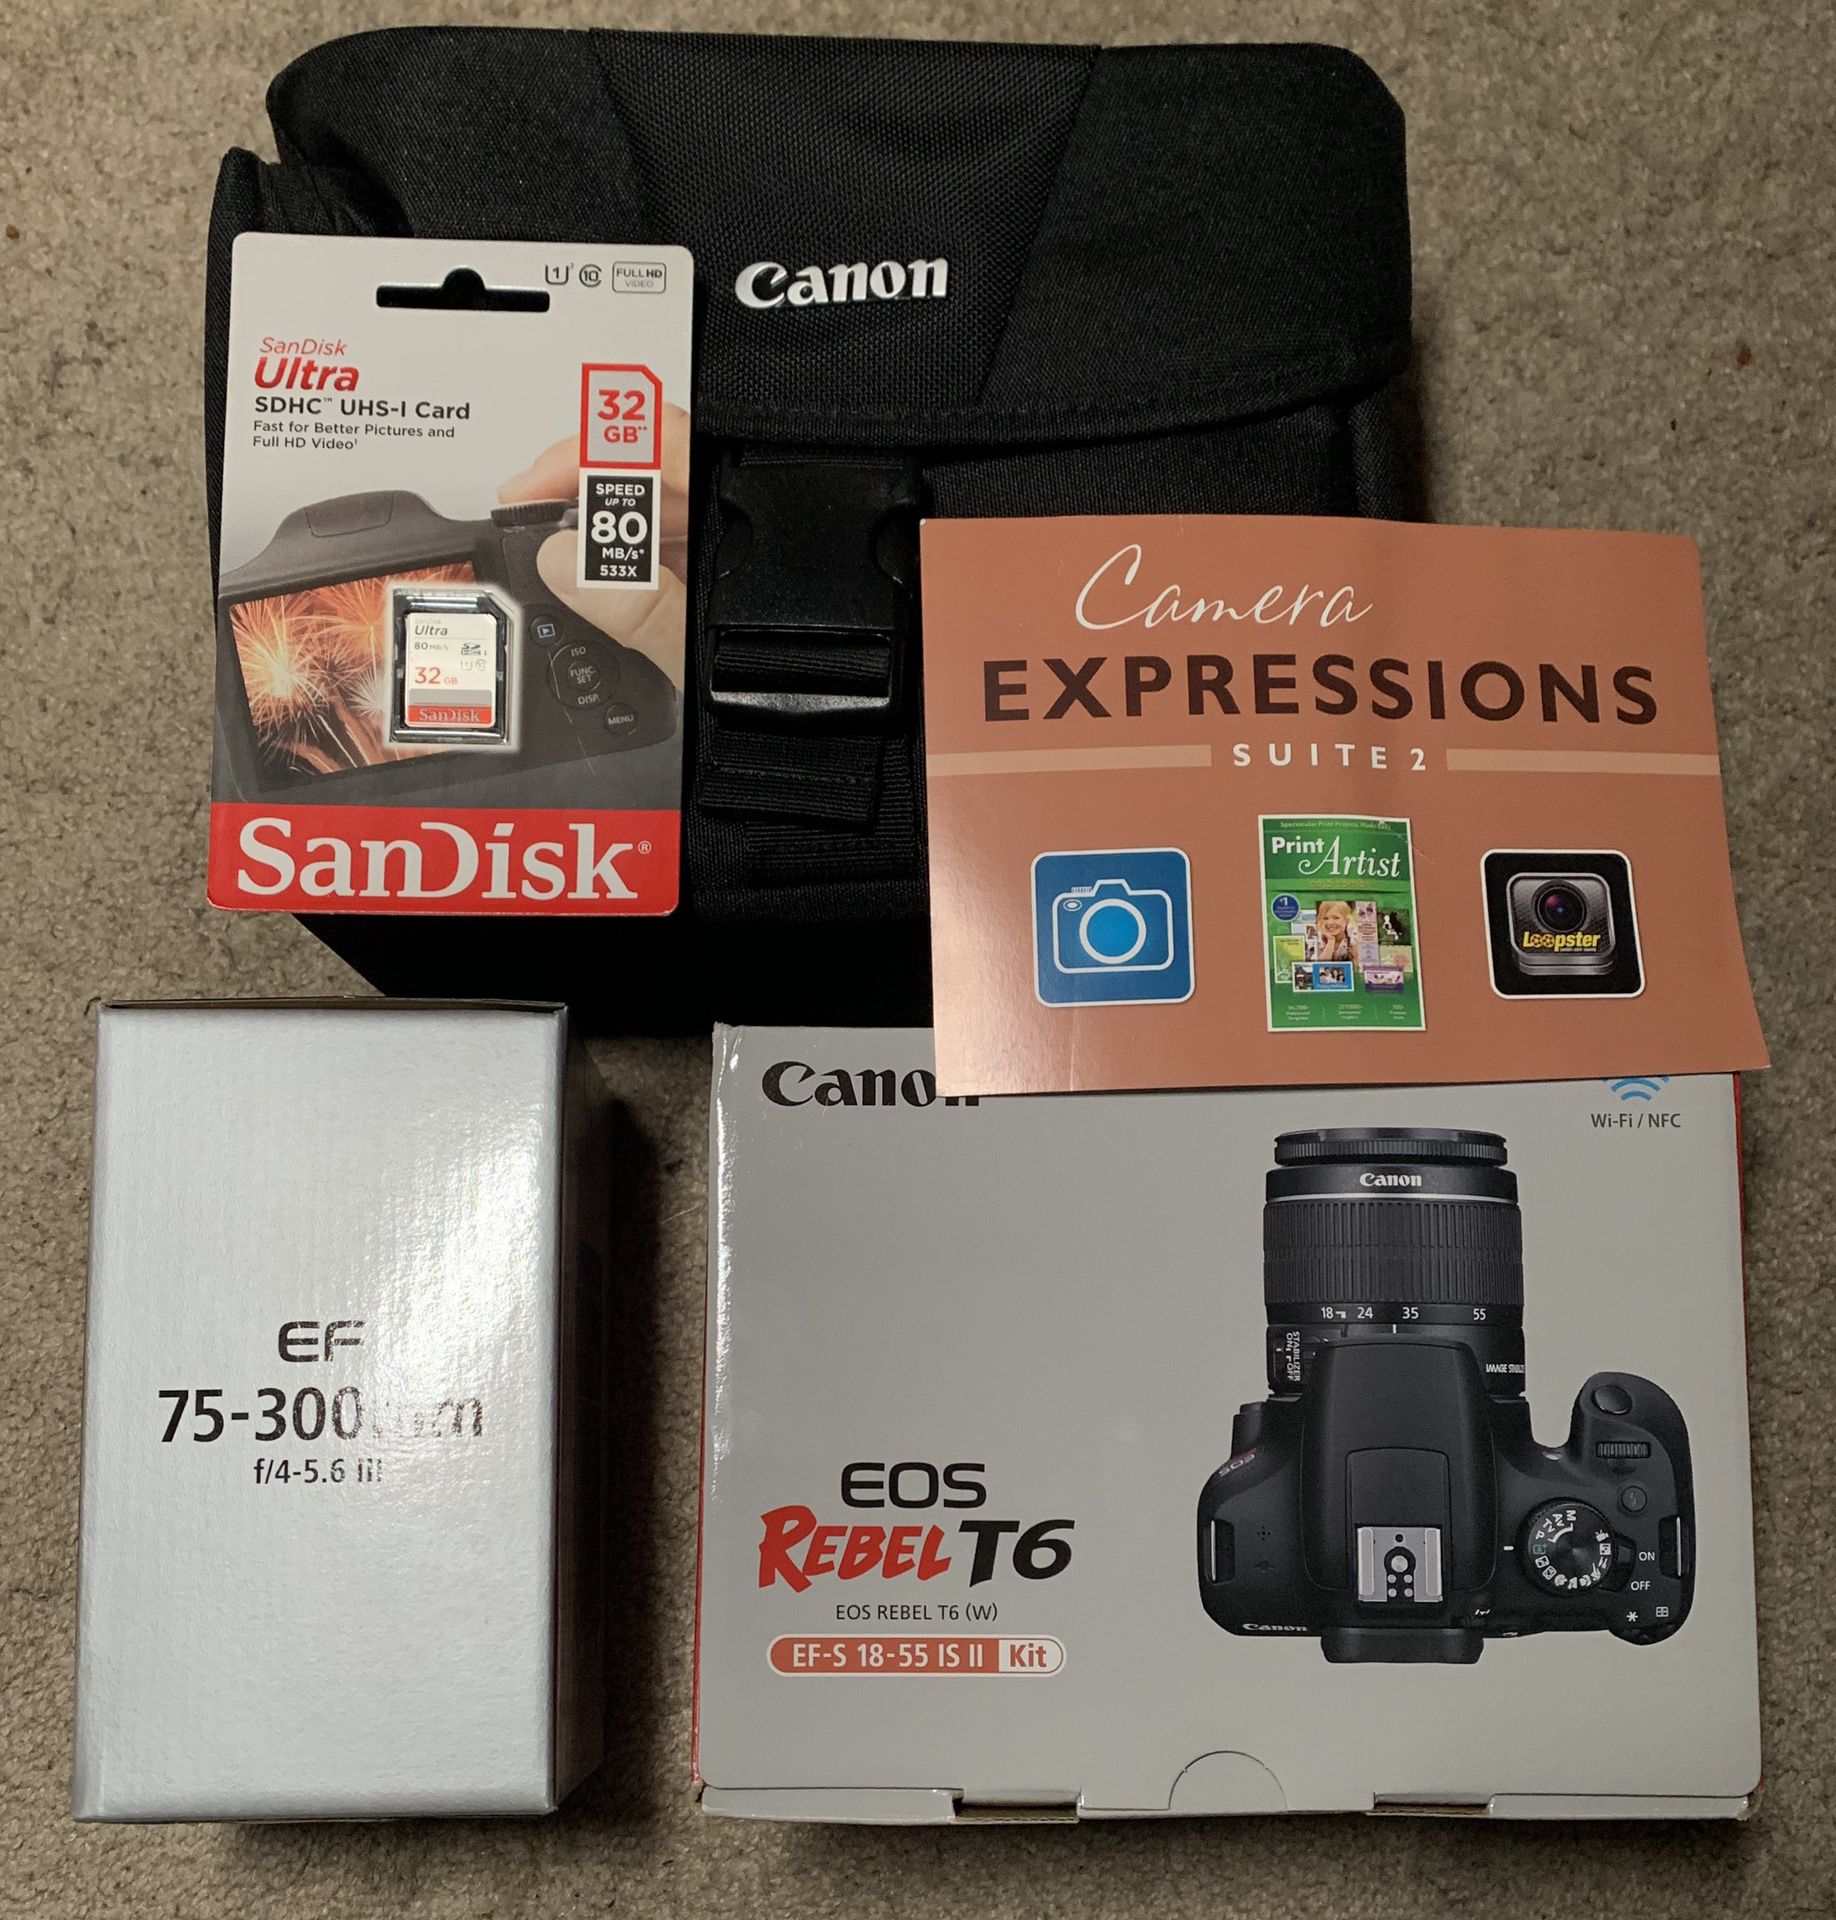 NEW - Canon - EOS Rebel T6 DSLR Two Lens Kit with EF-S 18-55mm IS II and EF 75-300mm III lens - Black